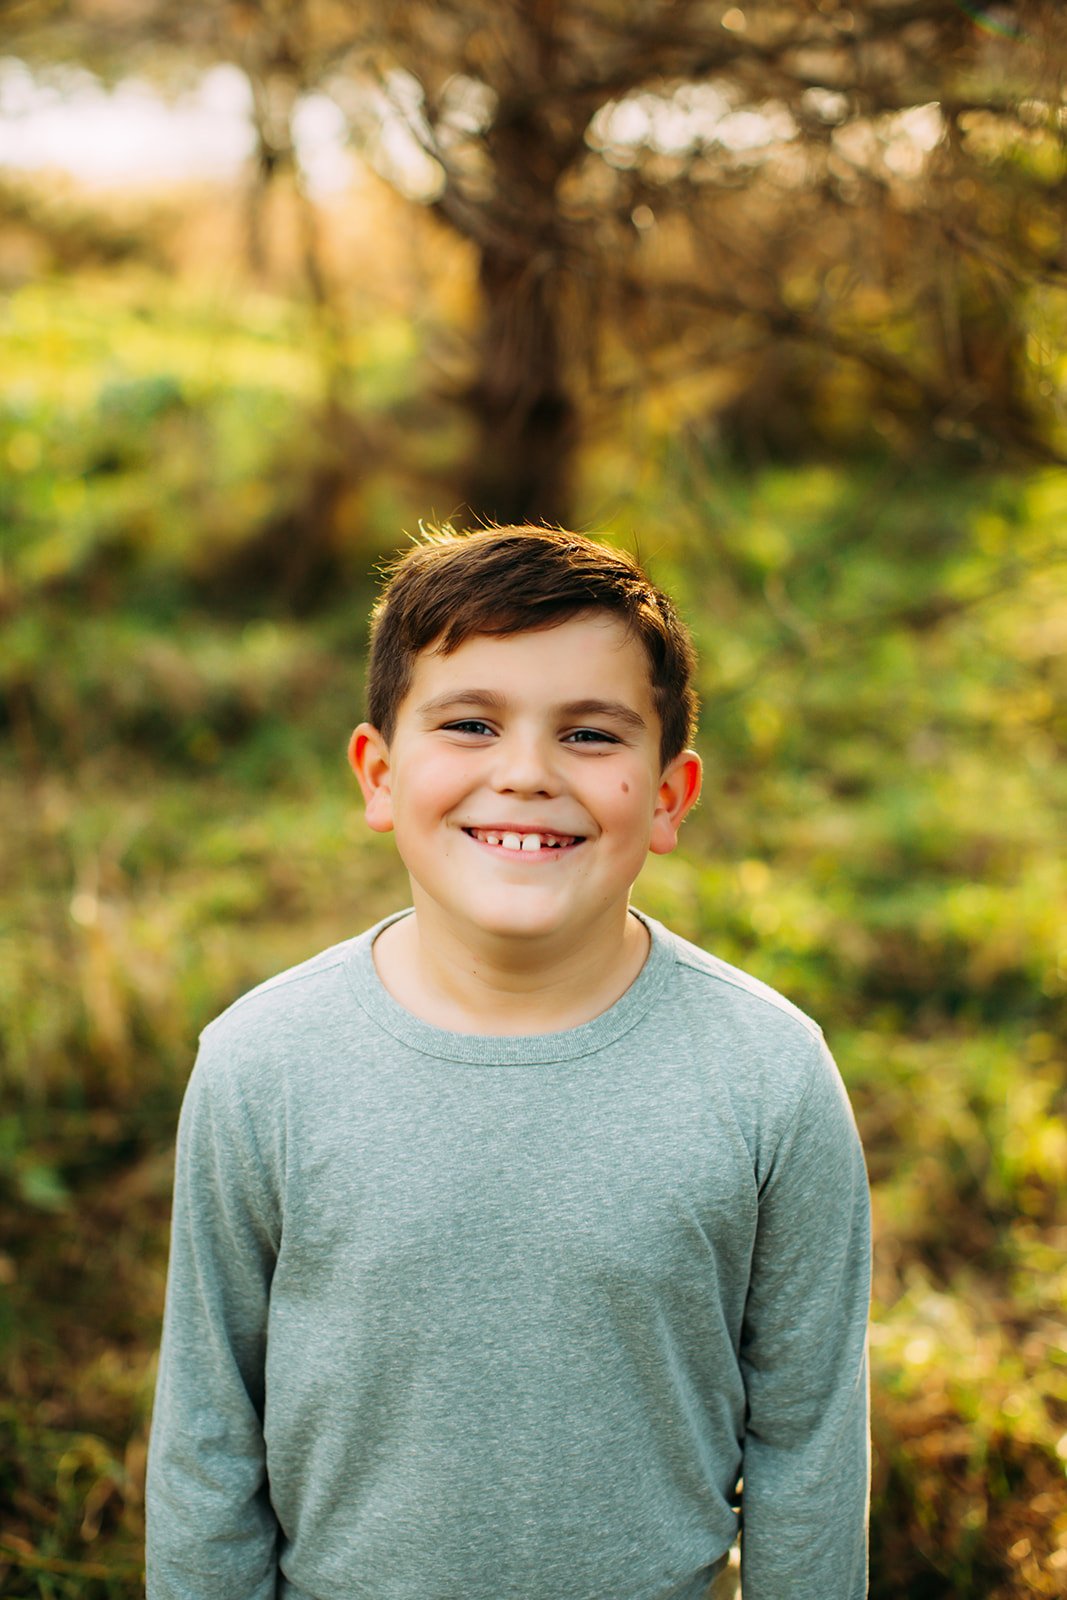  A boy wearing a long-sleeved shirt smiles for a portrait taken by Teala Ward Photography. Boy style for family photos #TealaWardPhotography #TealaWardFamilies #holidayfamilypics #photography #Illinoisfamilyphotography #familysession 